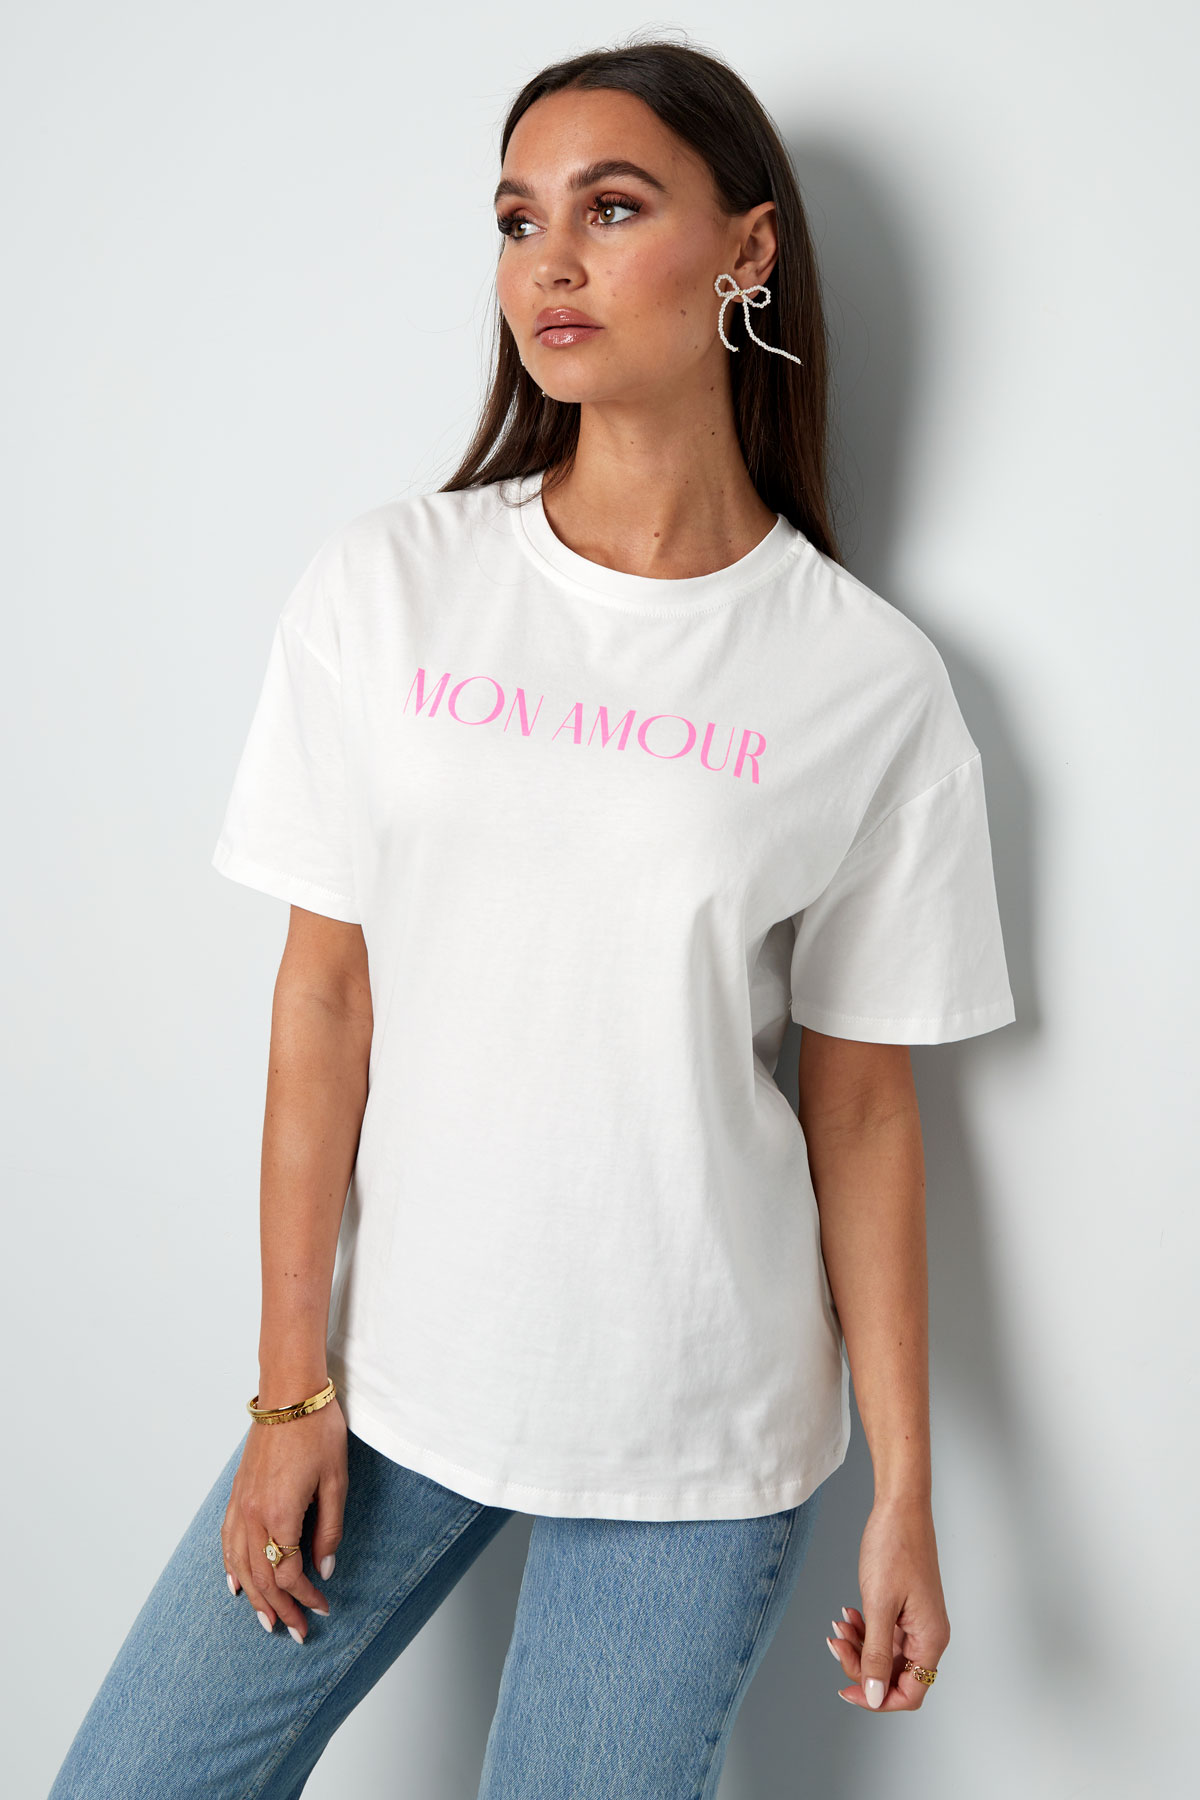 T-shirt mon amour - wit Afbeelding4